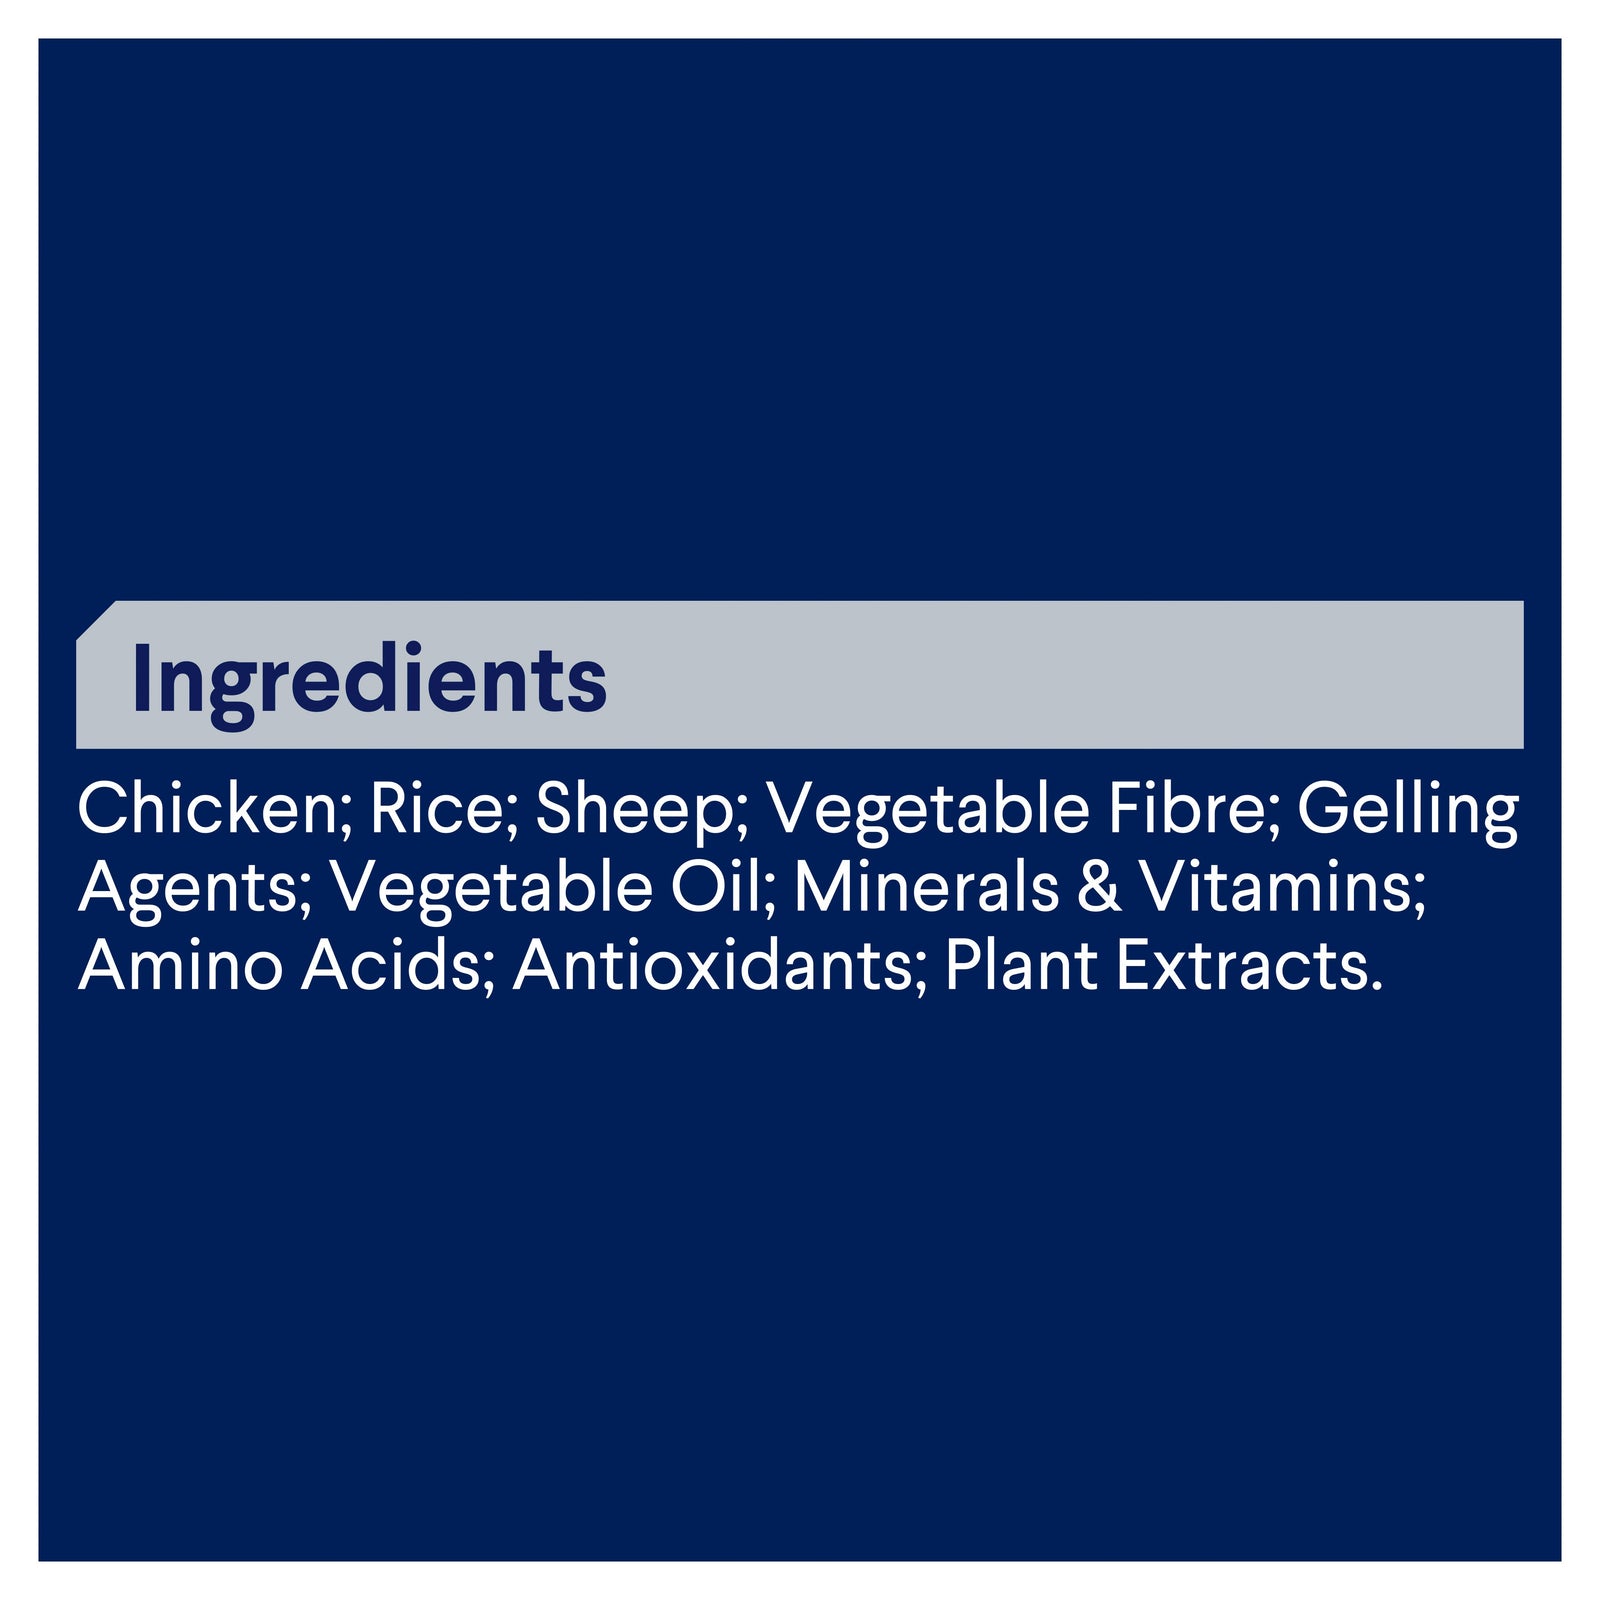 ADVANCE™ Adult all Breed Chicken and Salmon with Rice Cans